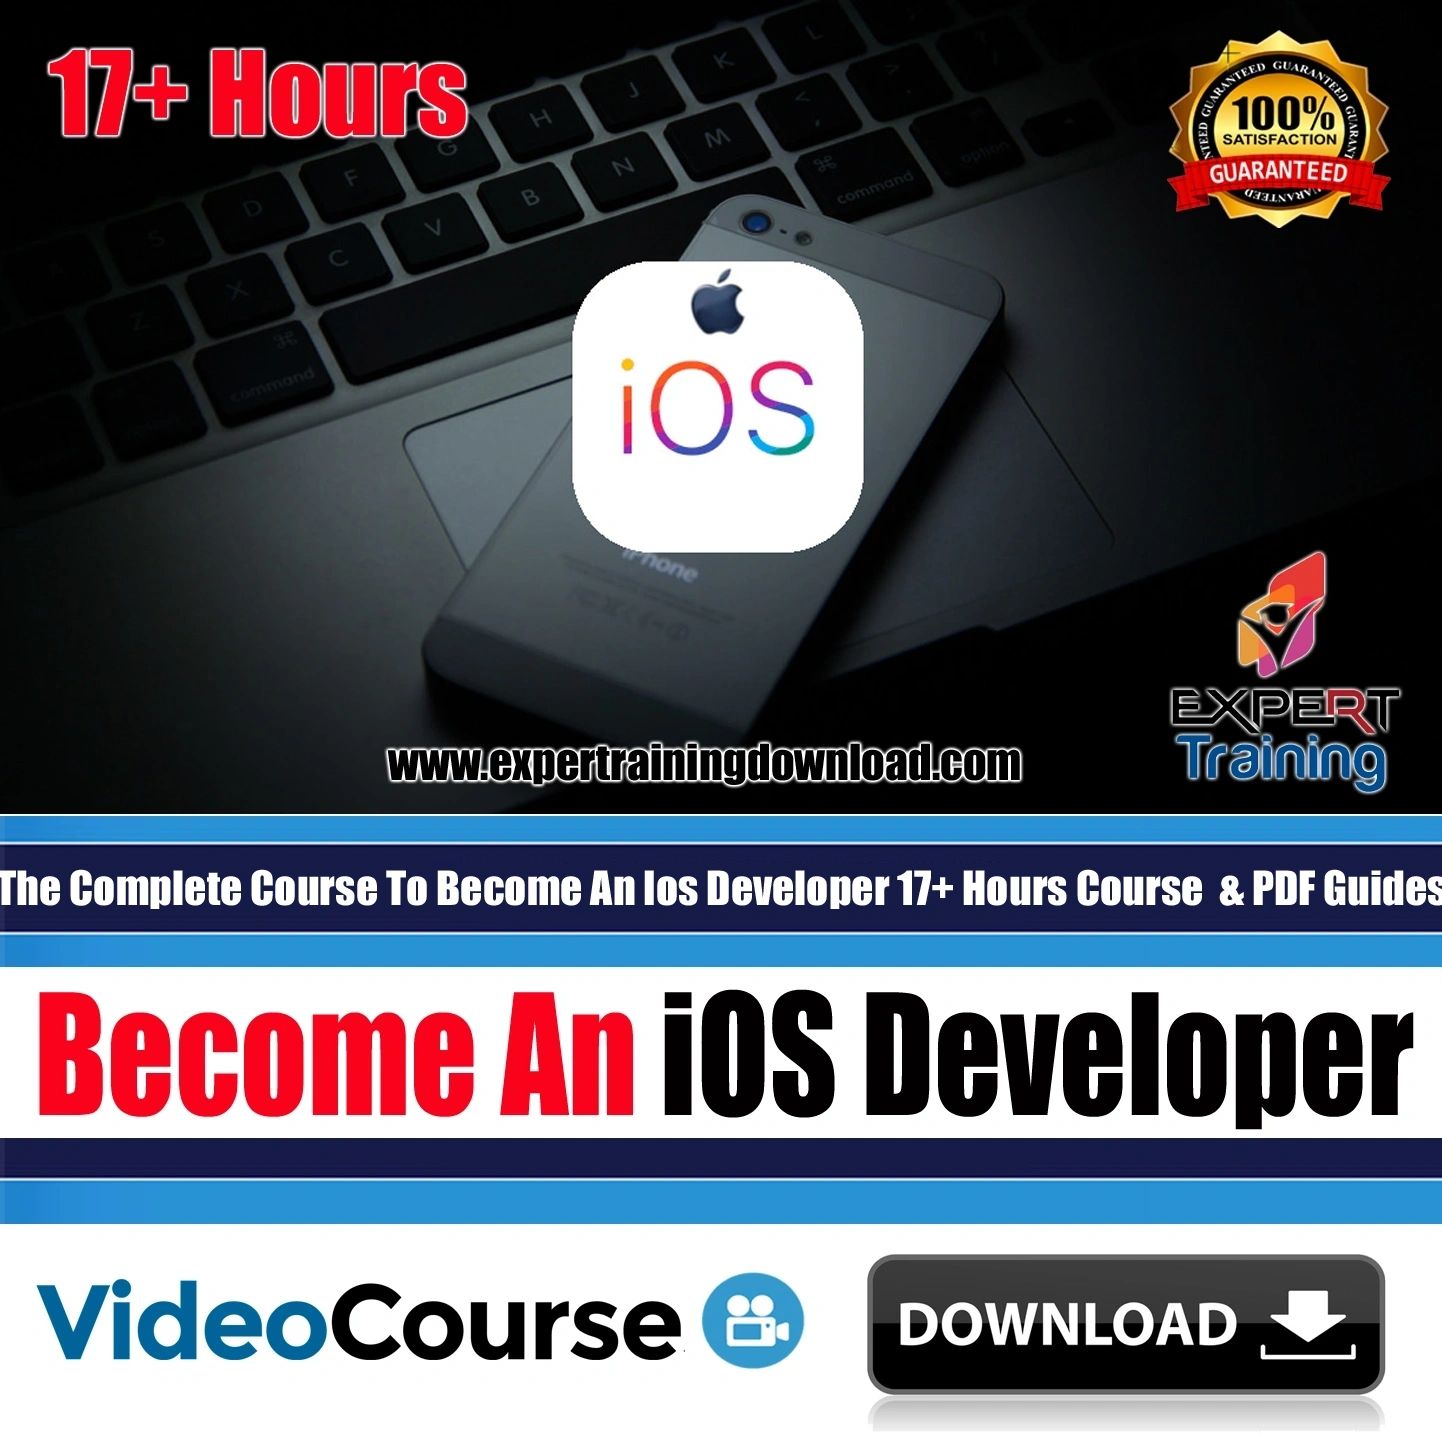 The Complete Course To Become An iOS Developer 17+ Hours Course & PDF Guides